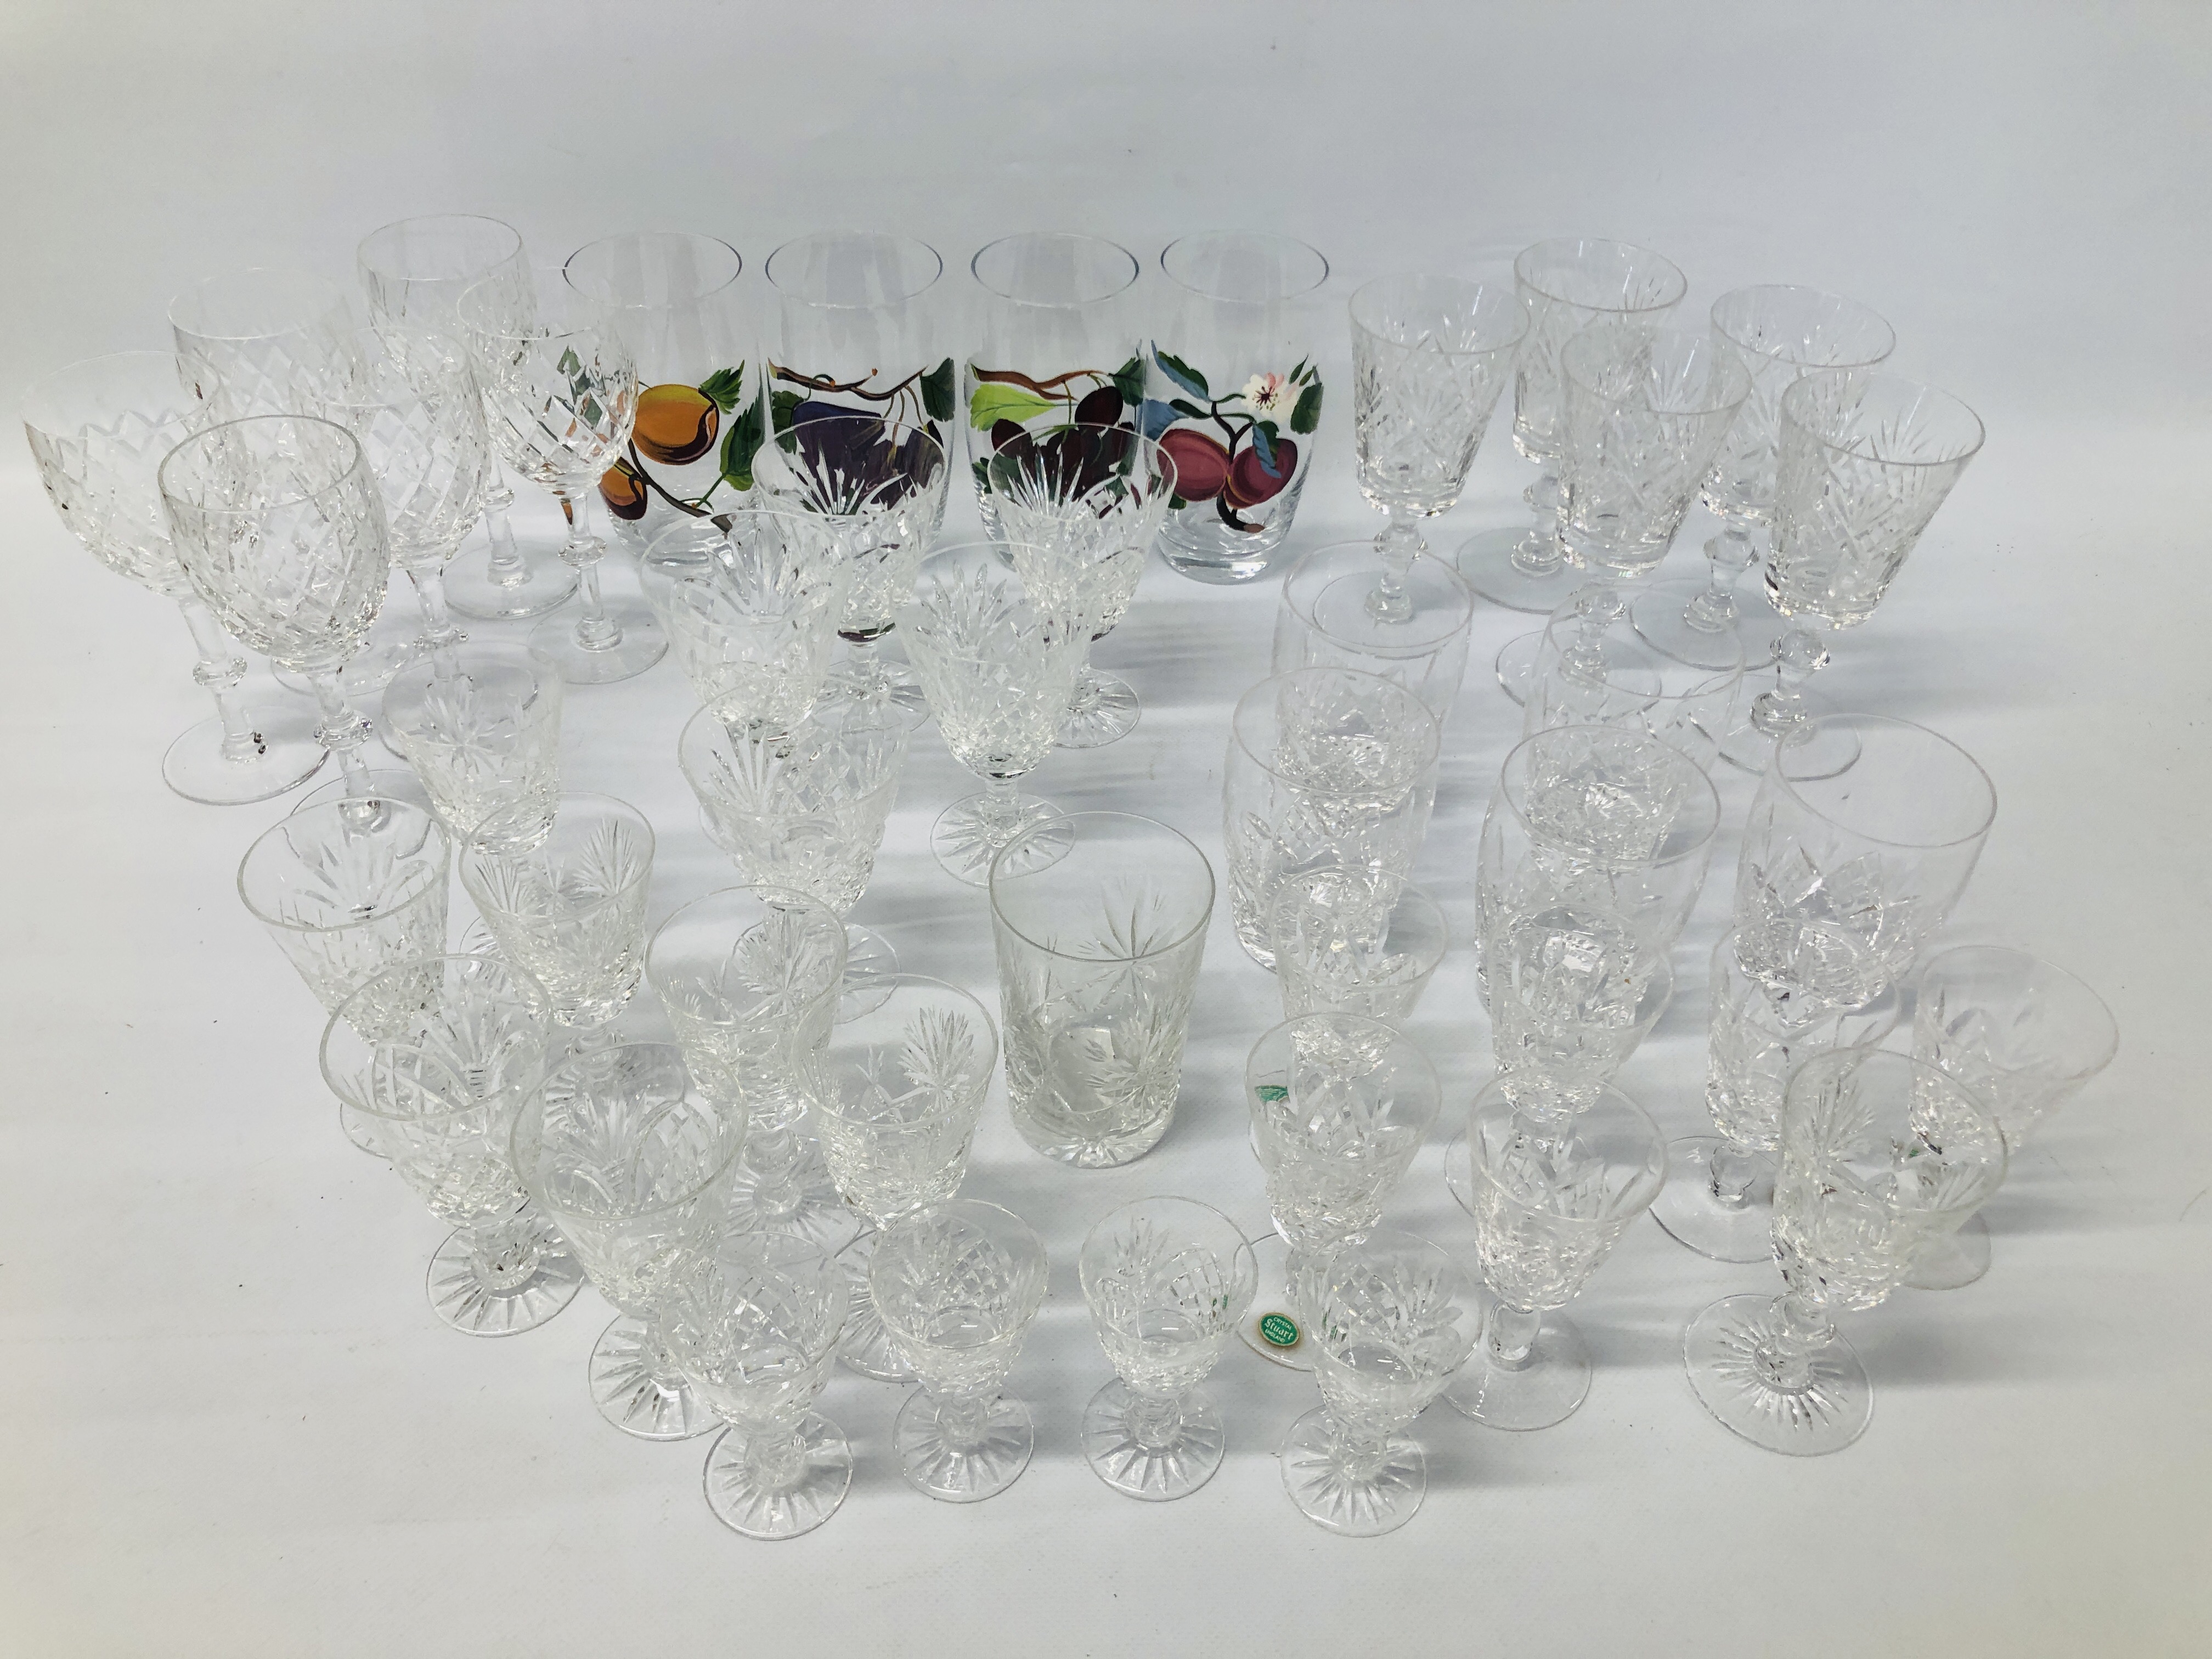 COLLECTION OF GOOD QUALITY CUT GLASS CRYSTAL DRINKING VESSELS ALONG WITH A SET OF 4 HAND PAINTED - Image 3 of 11